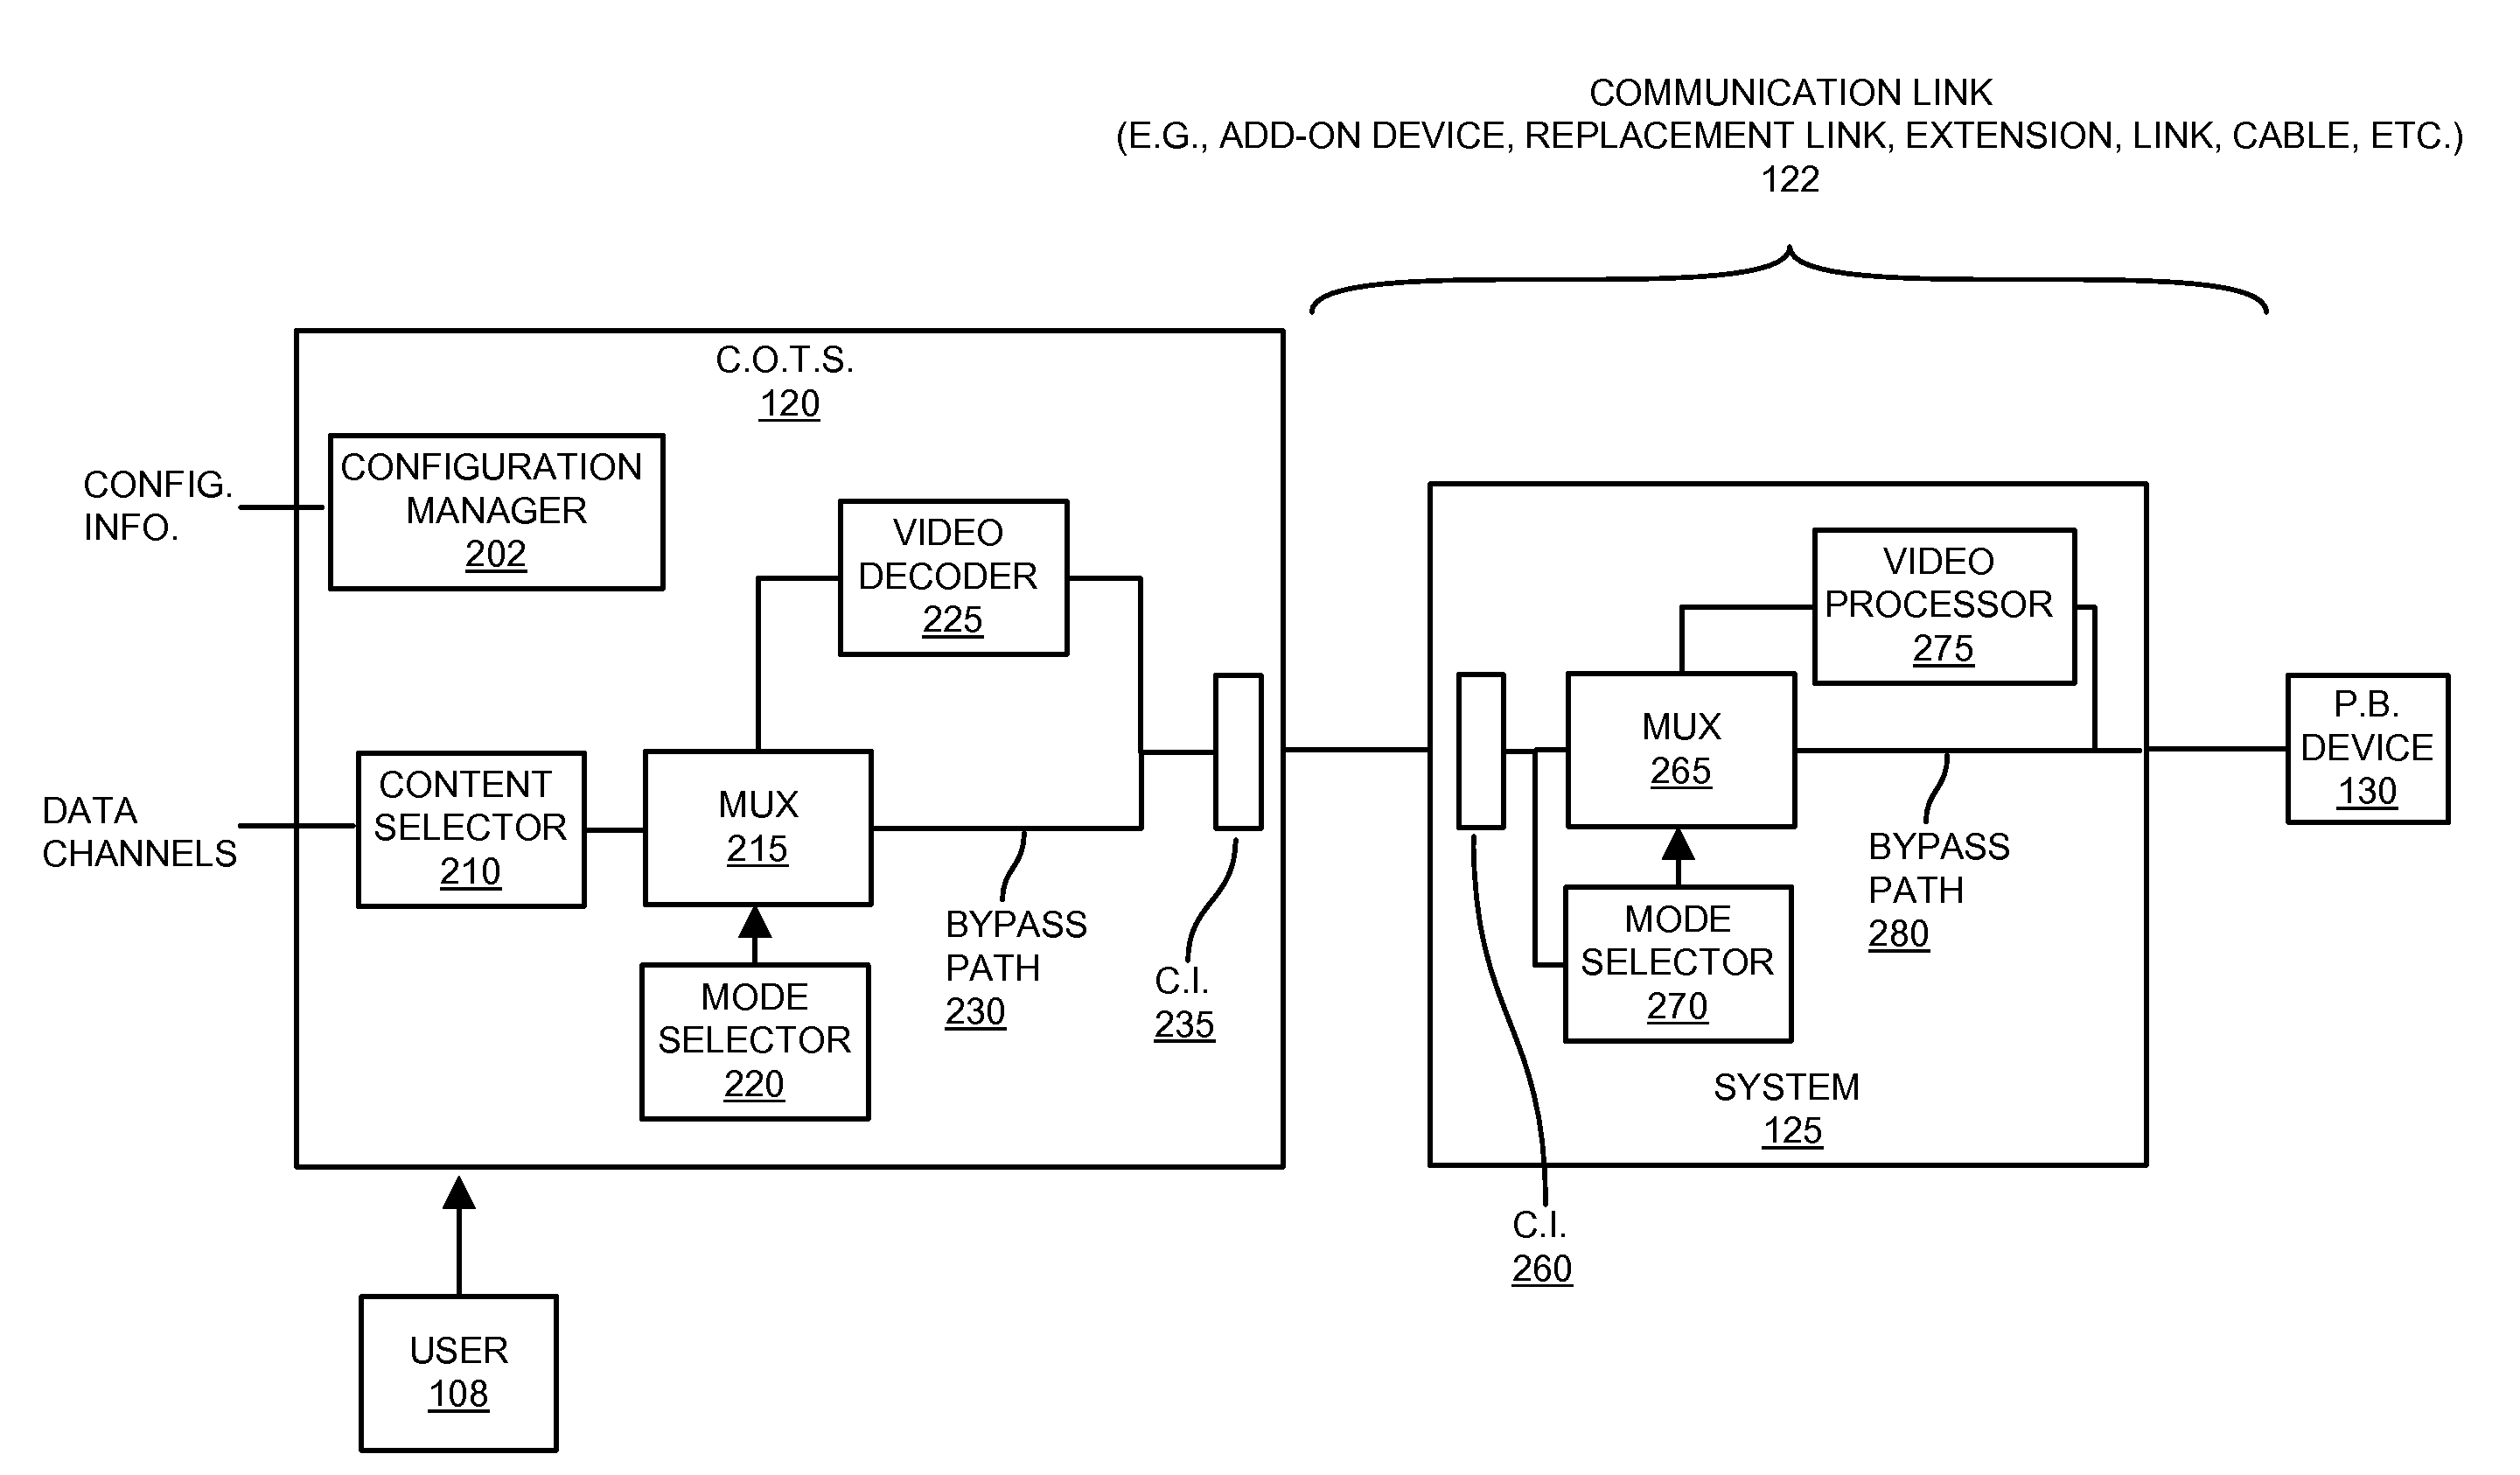 Enhanced video processing functionality in auxiliary system